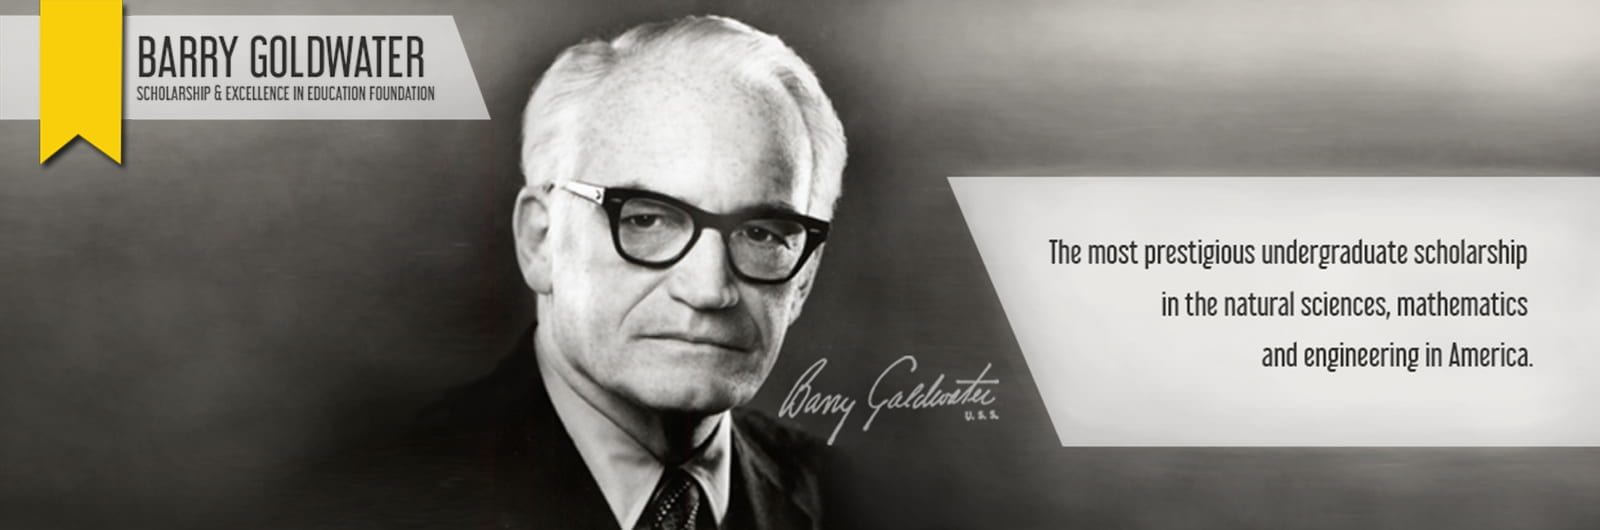 goldwater scholarship research essay